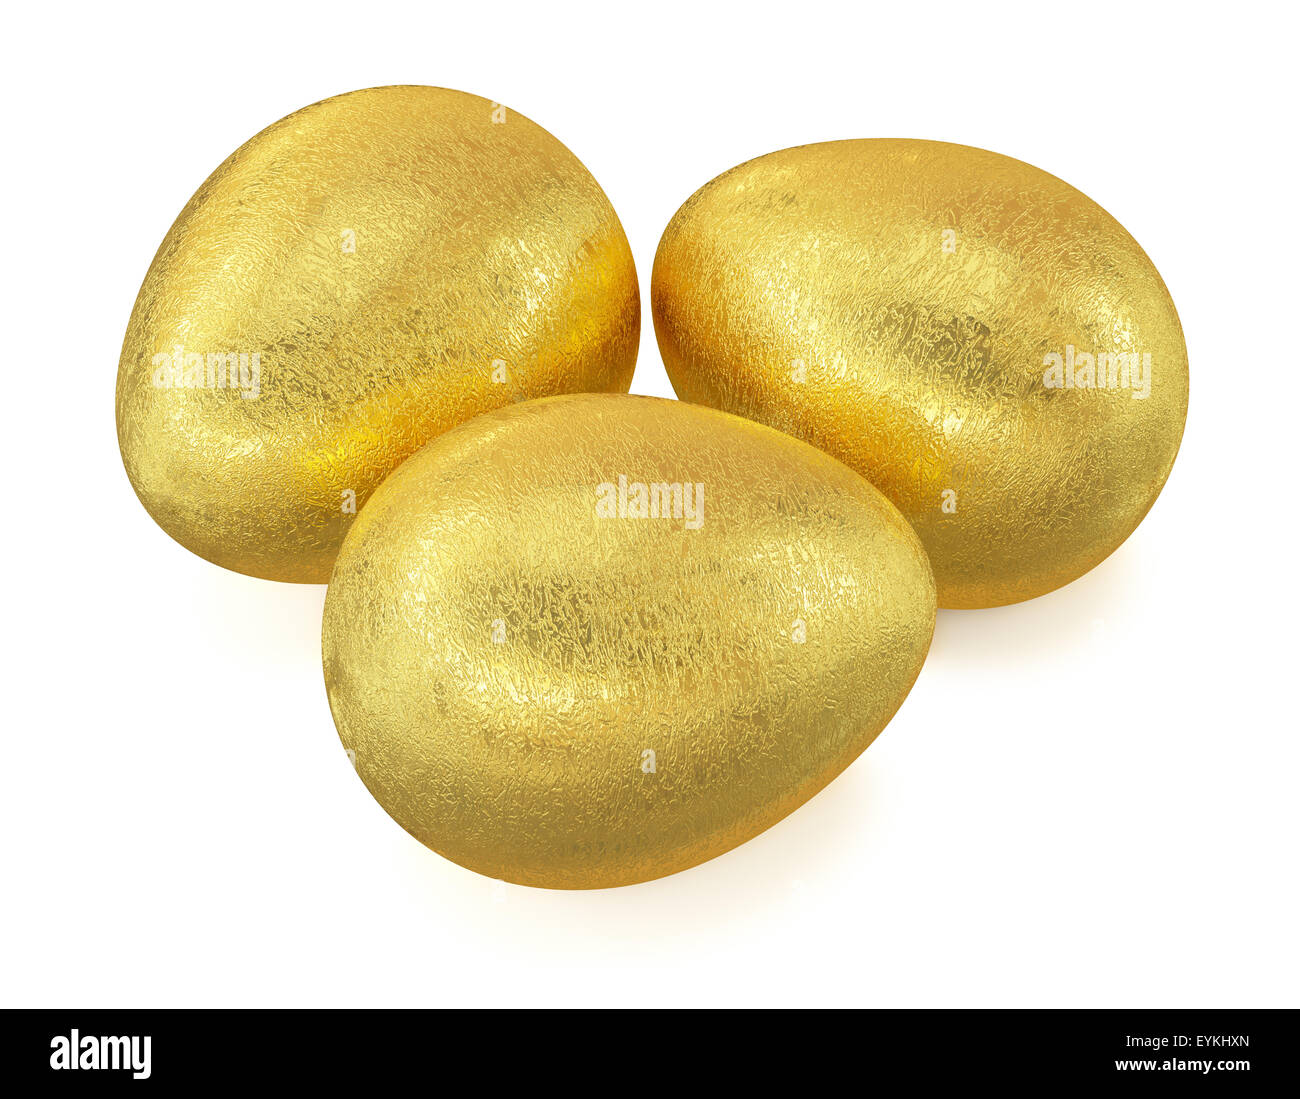 Three golden Easter eggs isolated on white background Stock Photo